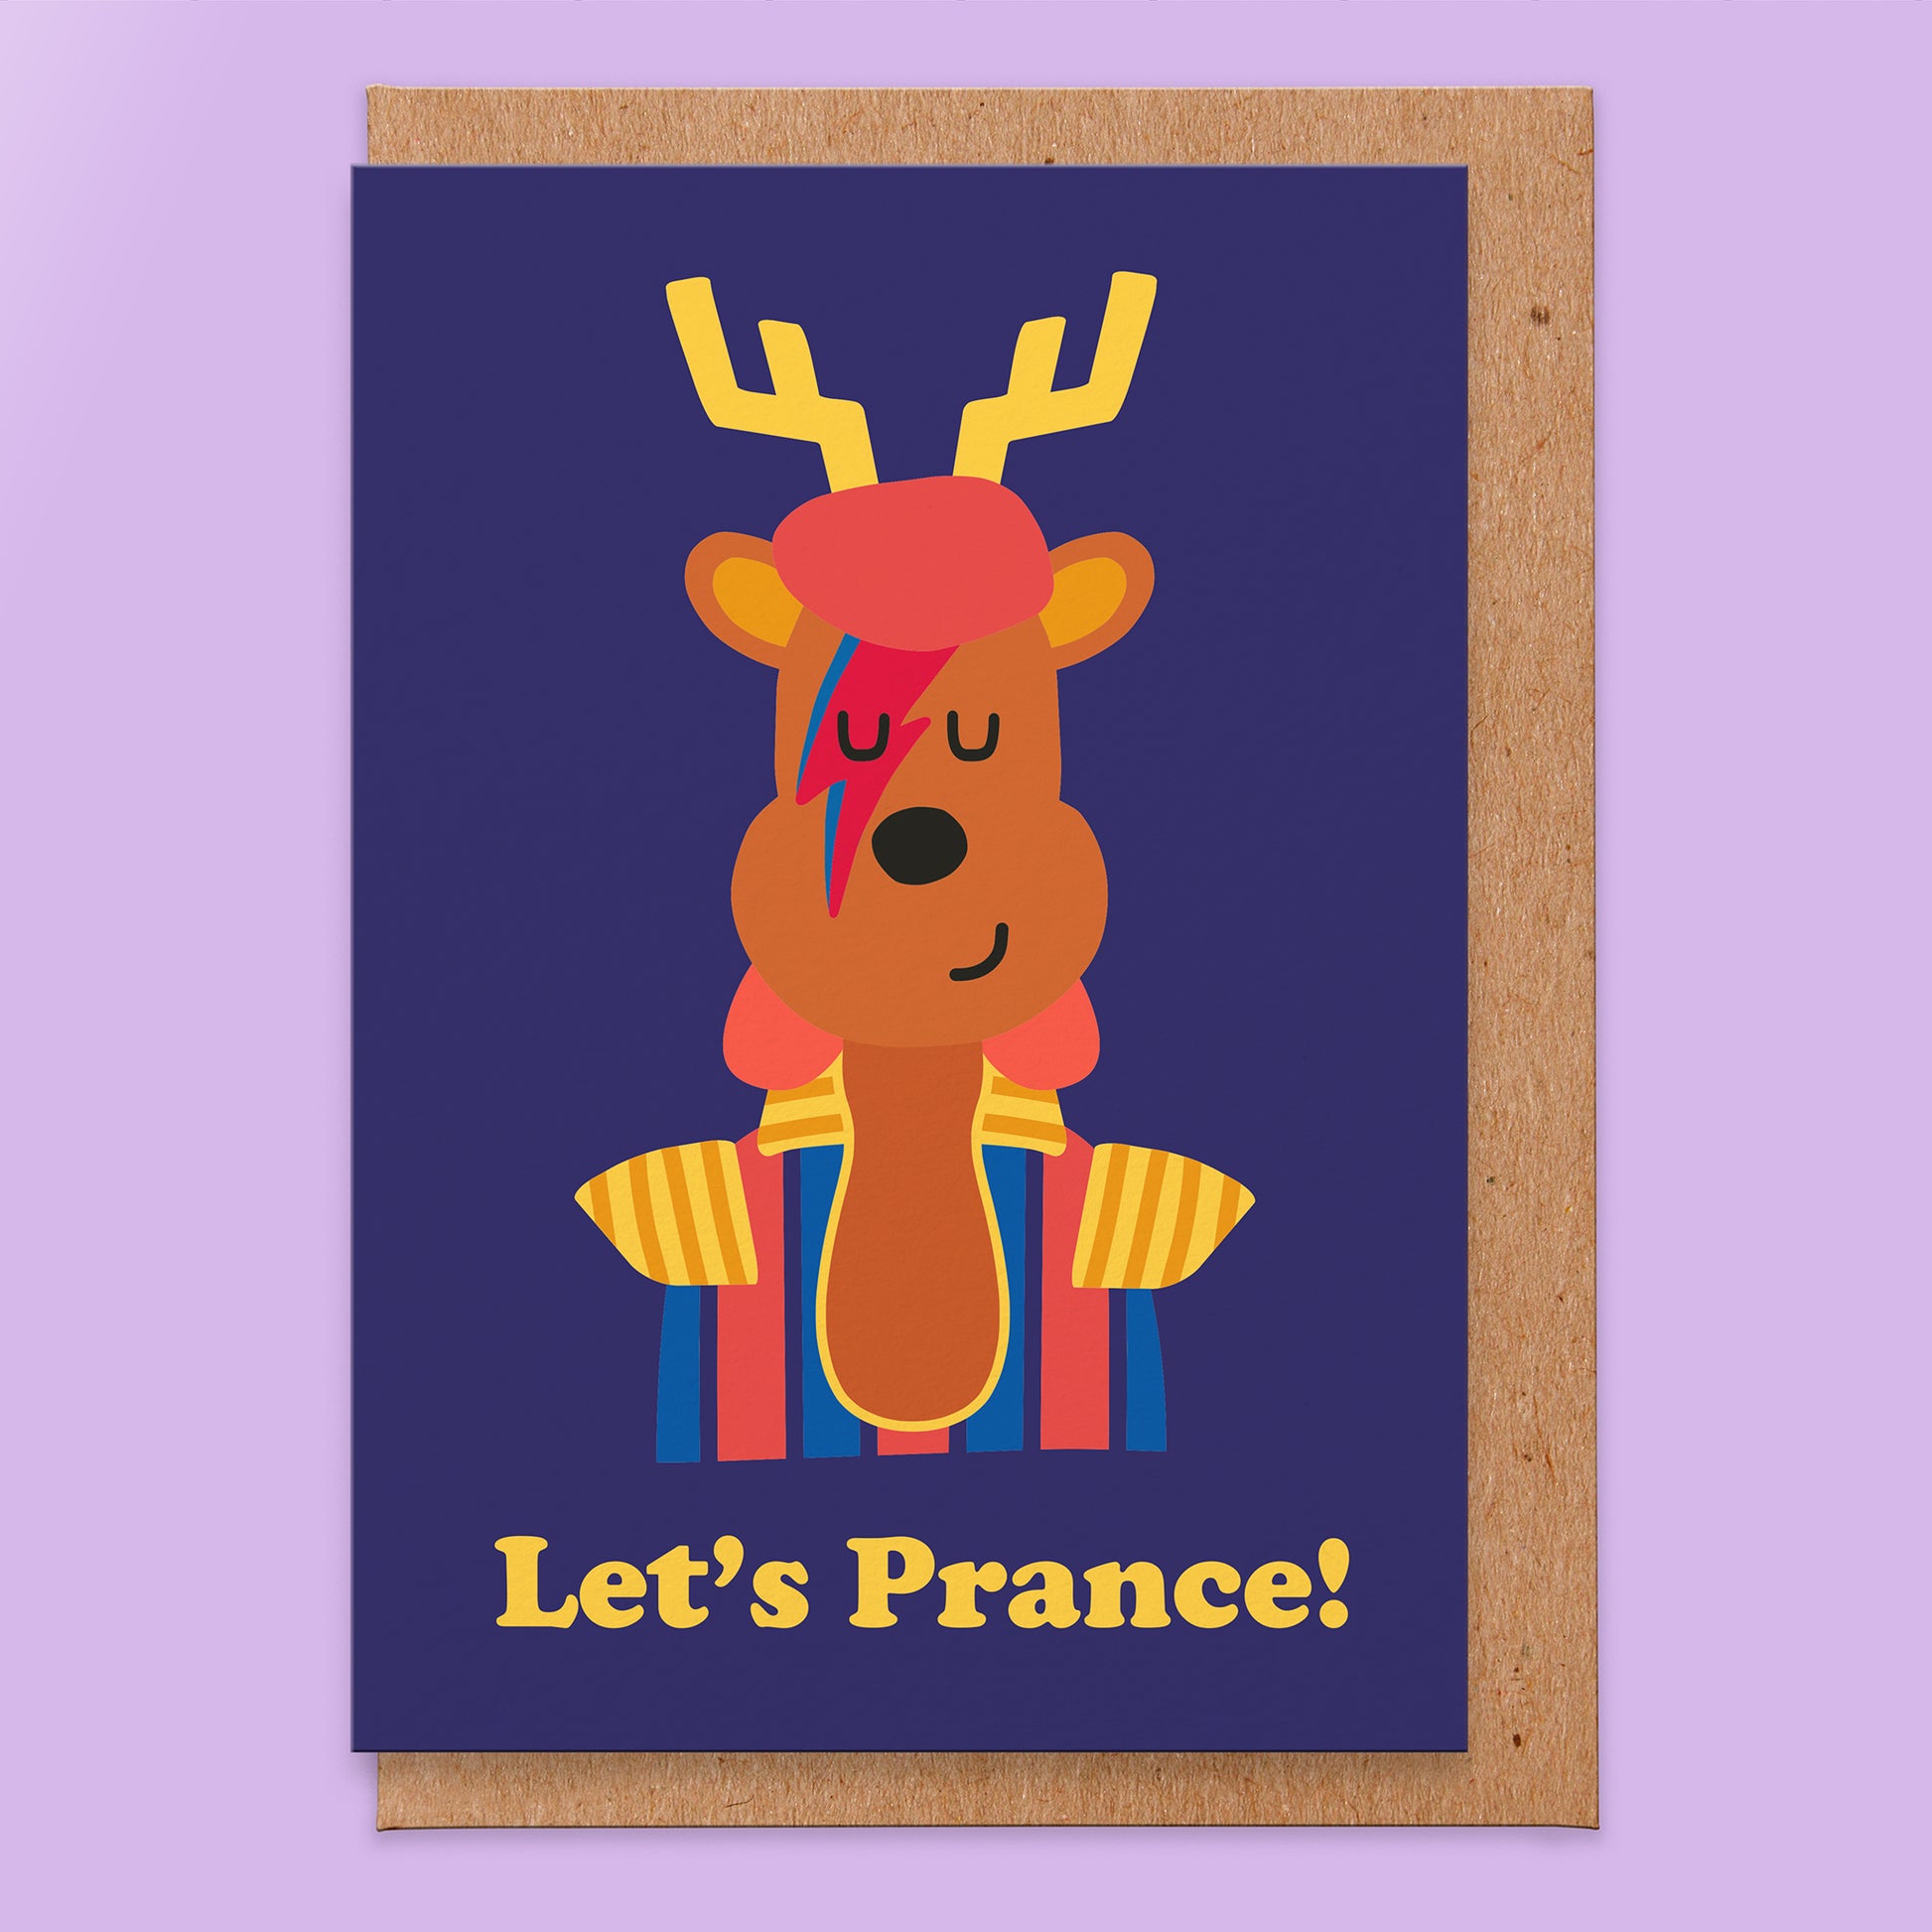 Christmas card that reads let's prance! With an illustration of a reindeer dressed as the starman singer.